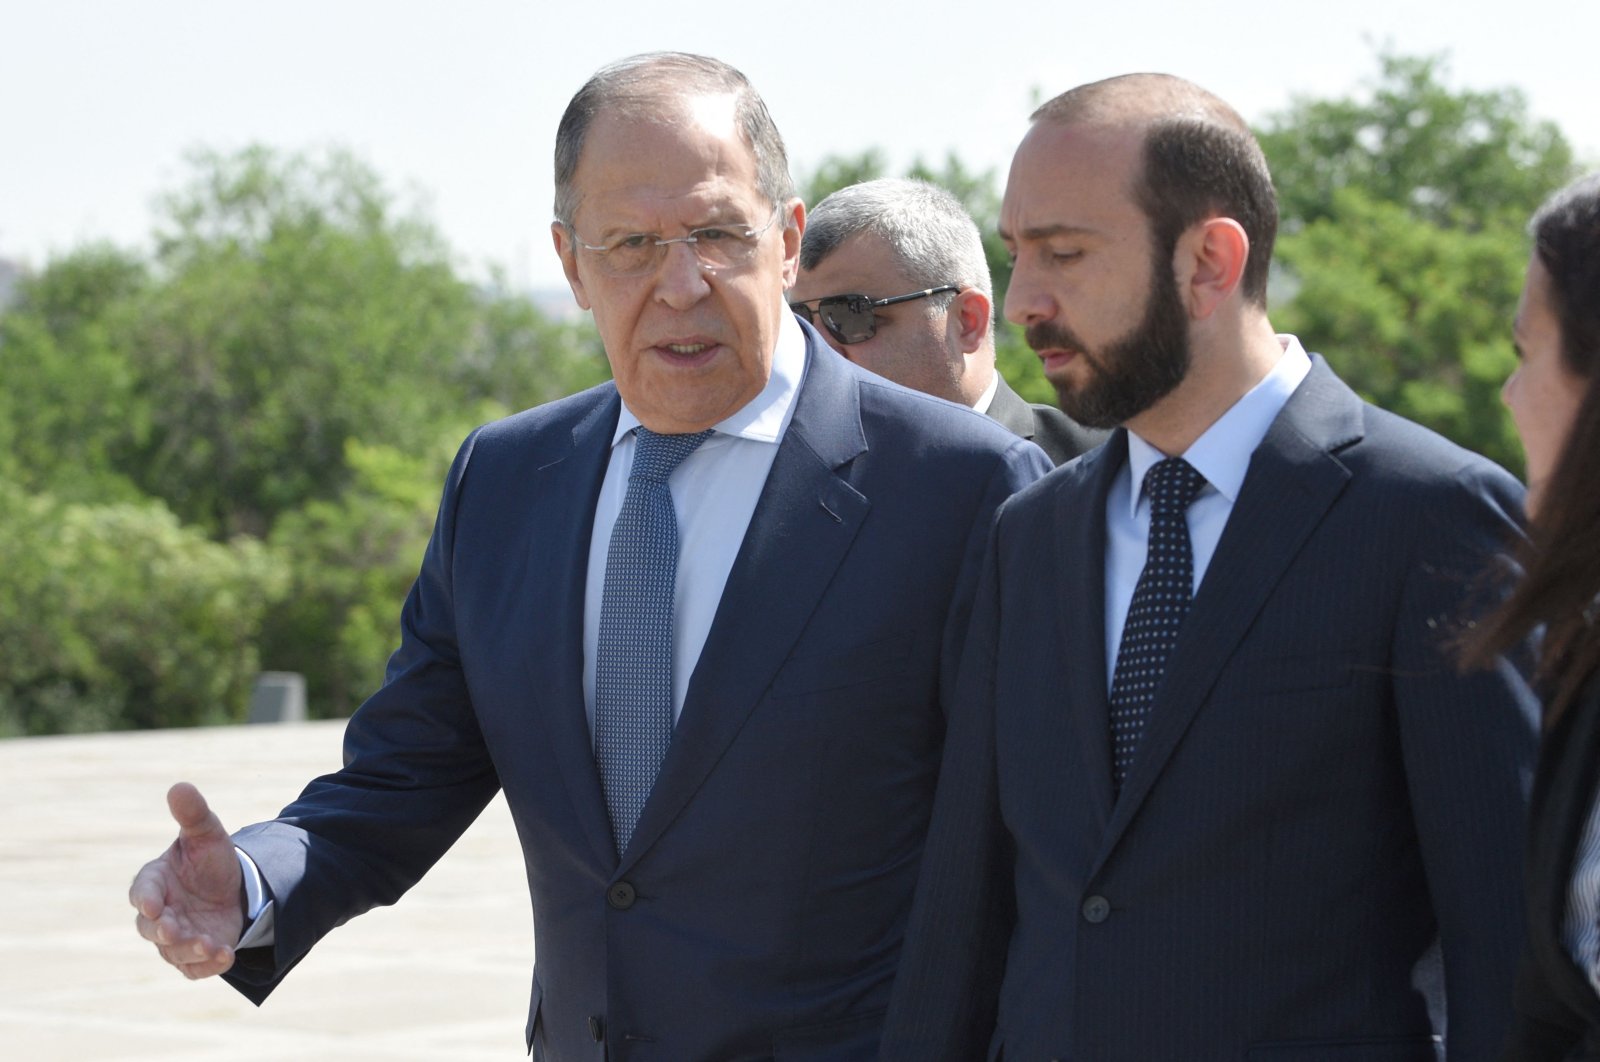 Russian Foreign Minister Sergei Lavrov (L) and Armenian Foreign Minister Ararat Mirzoyan in Yerevan, Armenia, June 9, 2022. (AFP Photo)